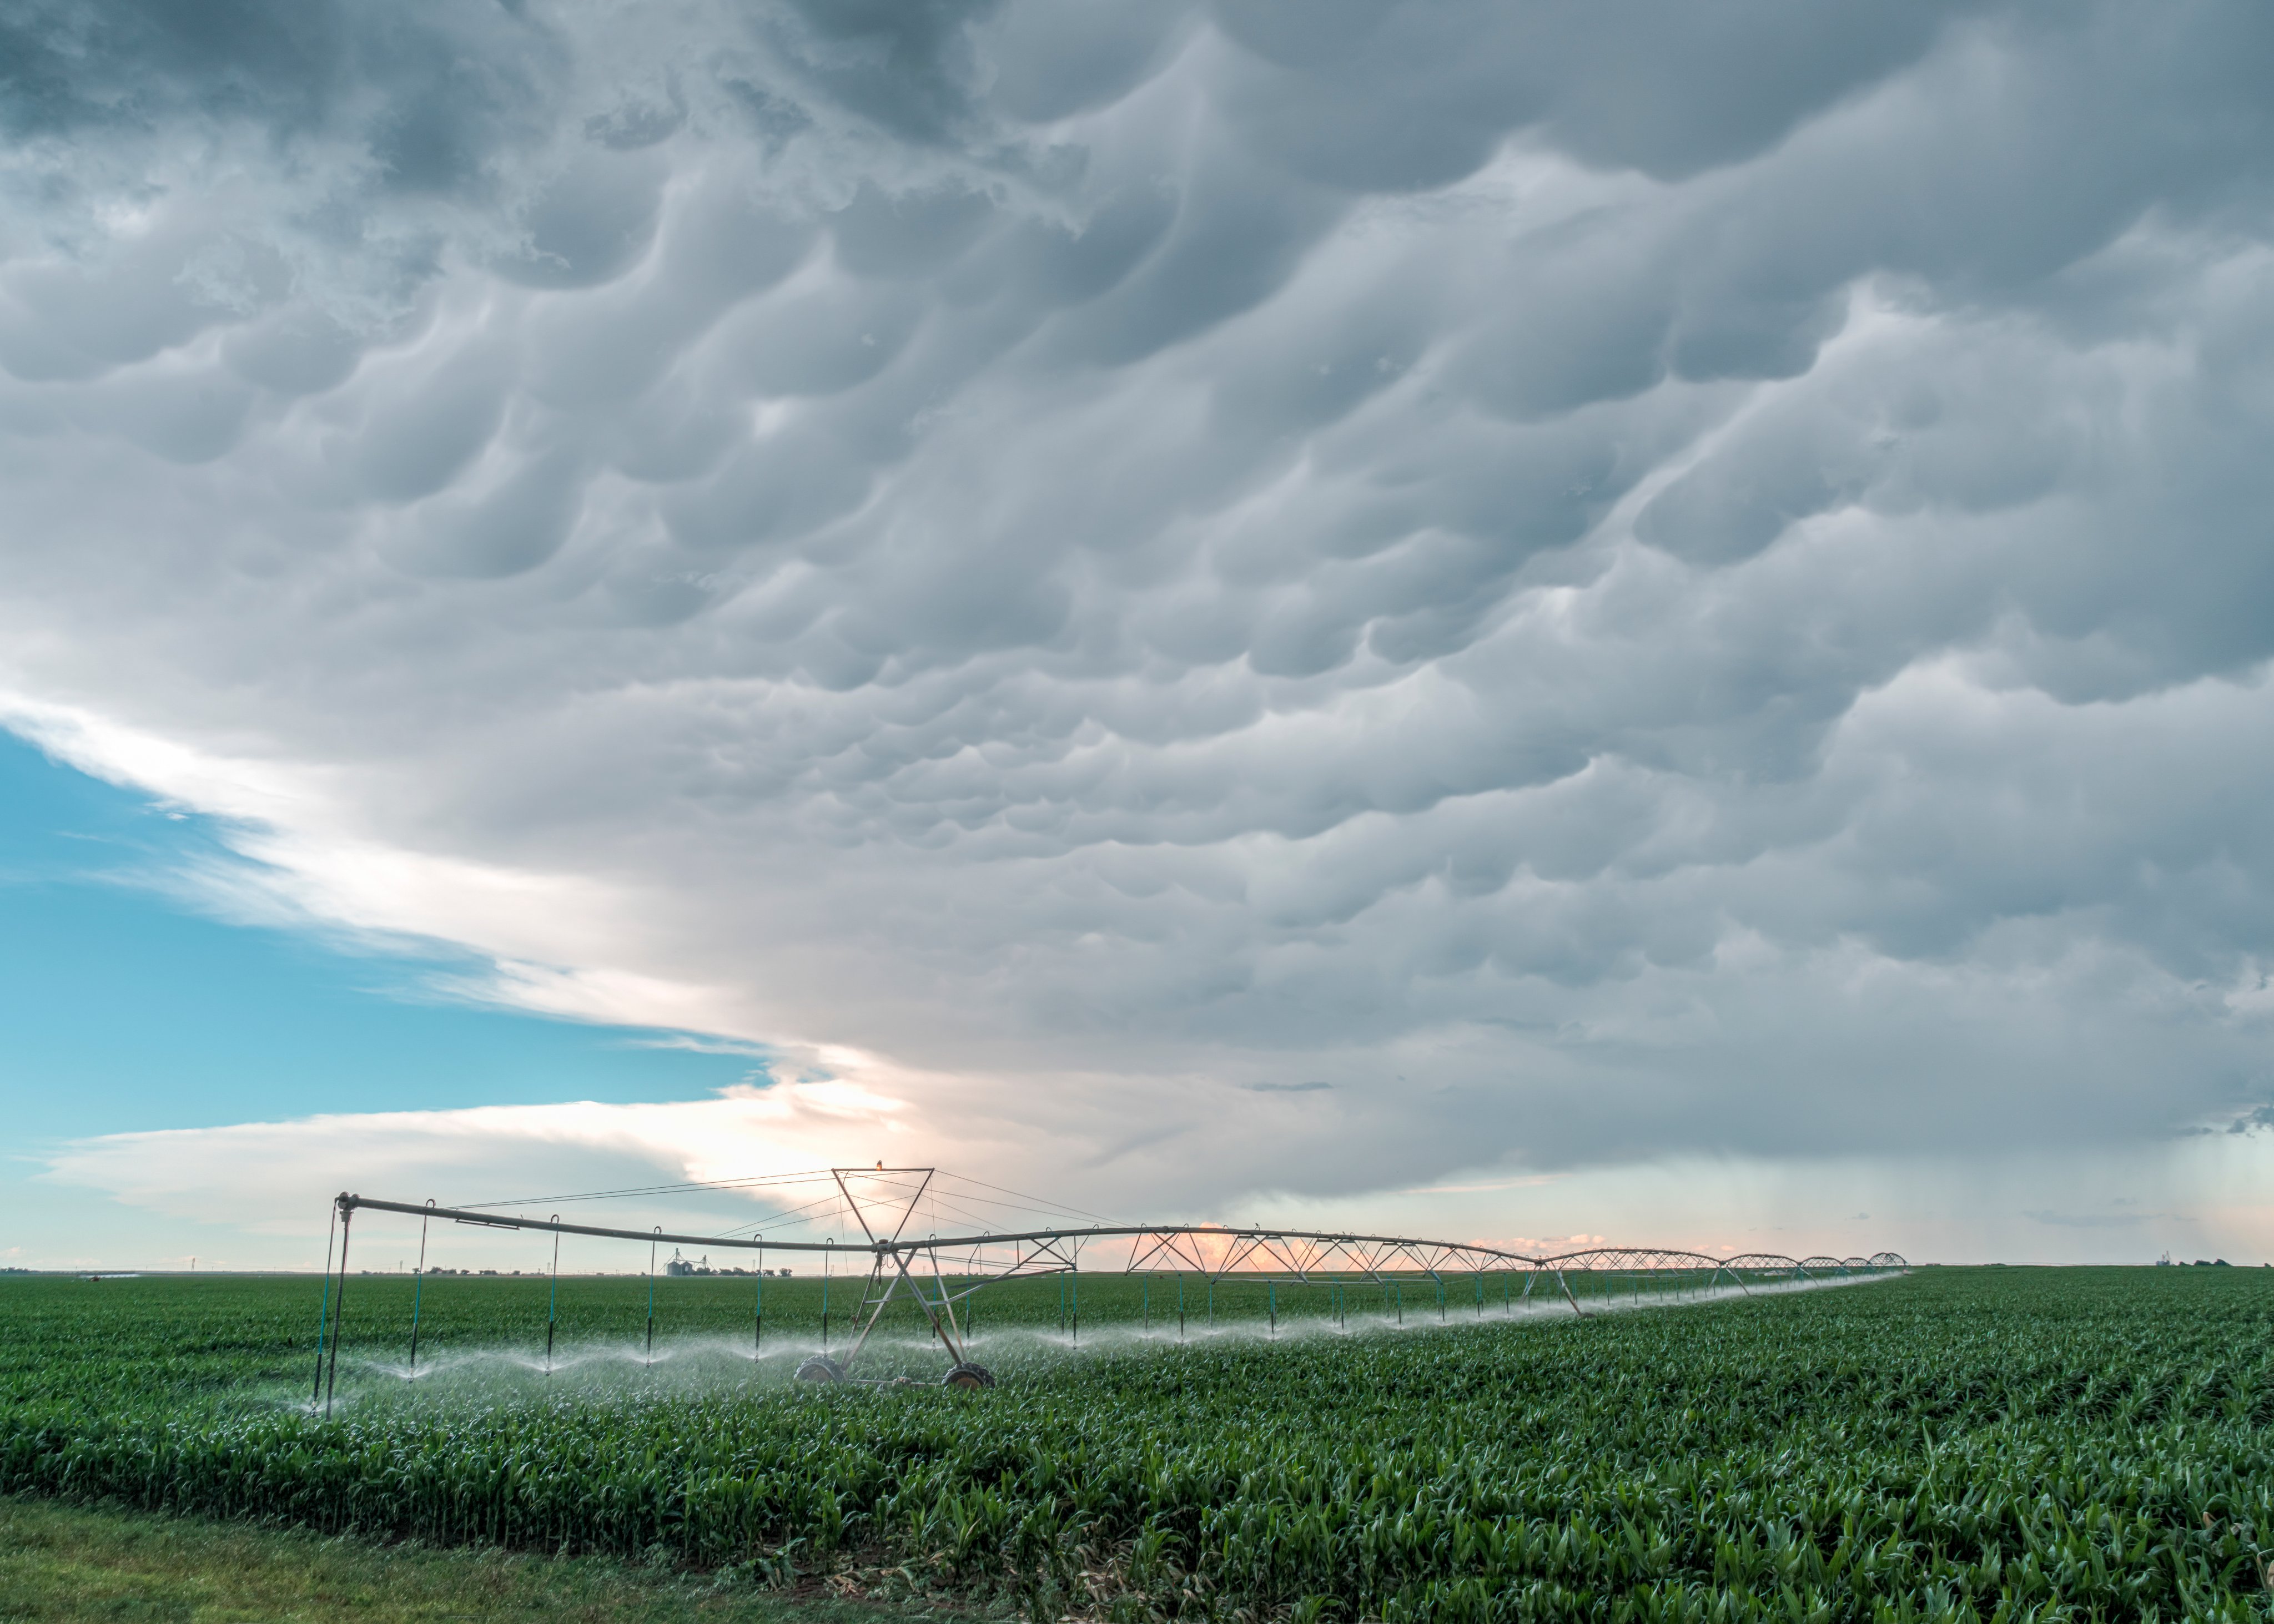 3rd Place Irrigating a KS farm field with mammatus overhead by Laura Hedien- Storm Clouds Photography @lhedien